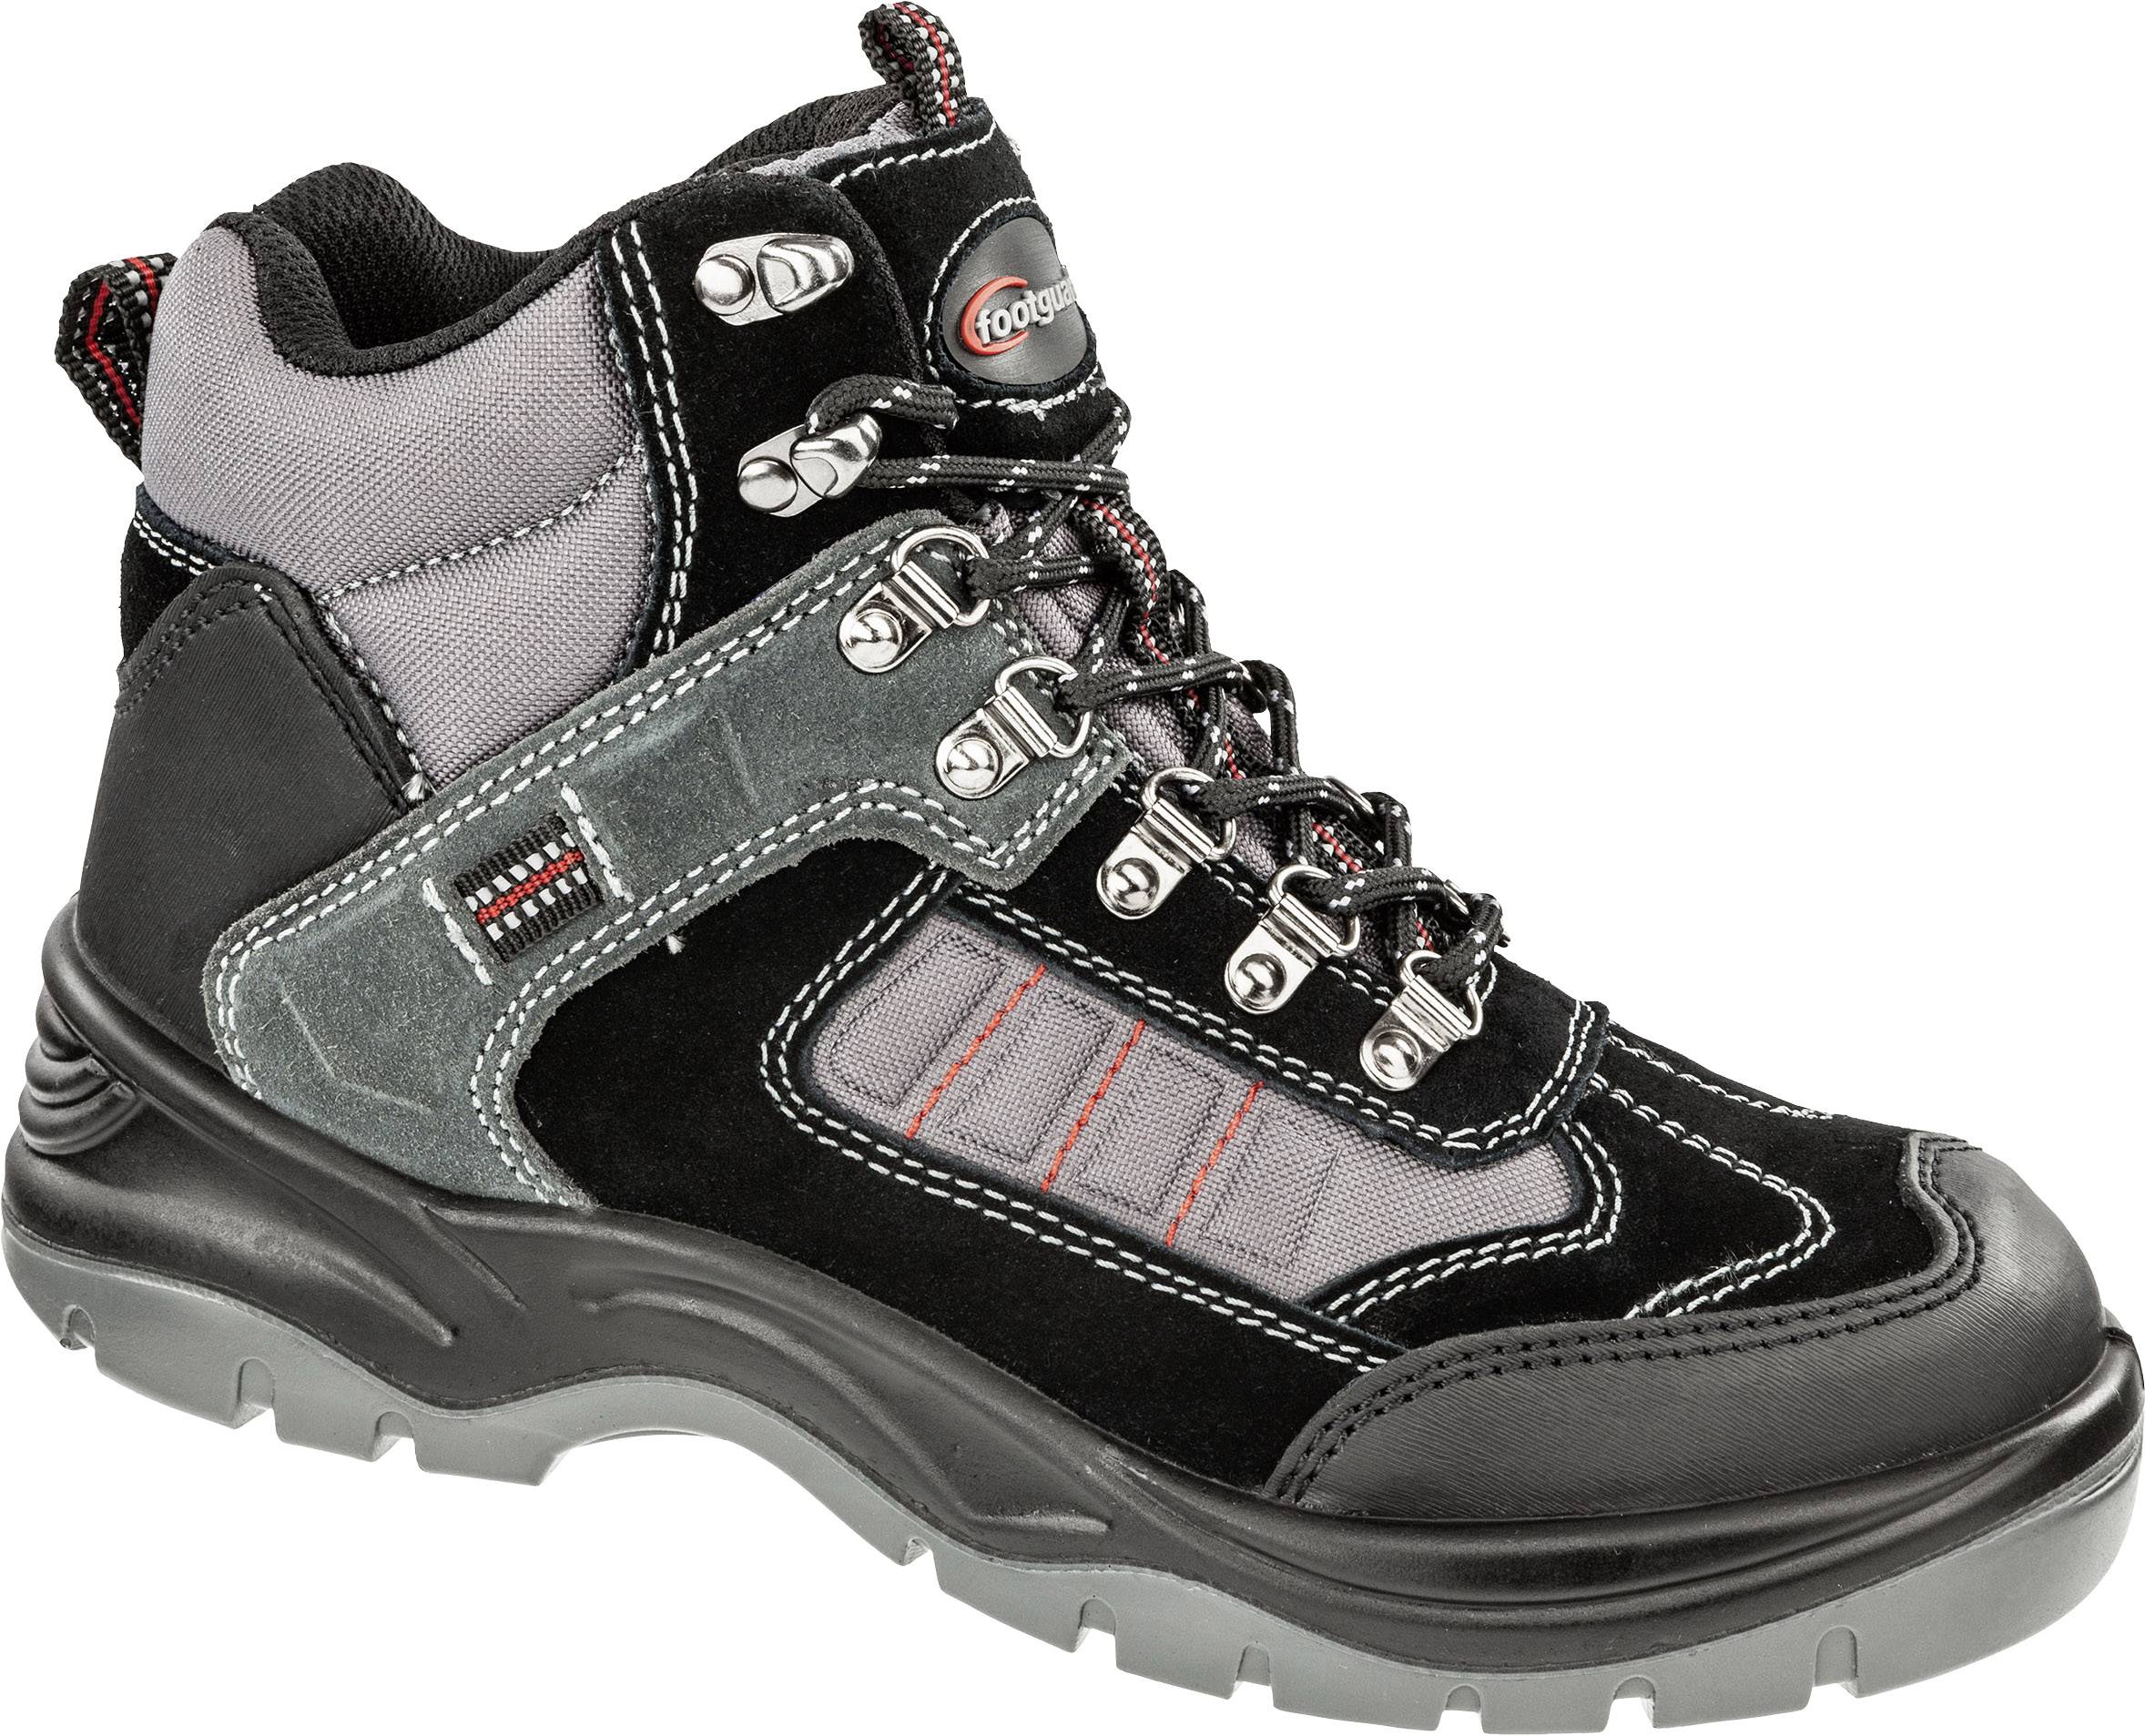 foot guard safety shoes